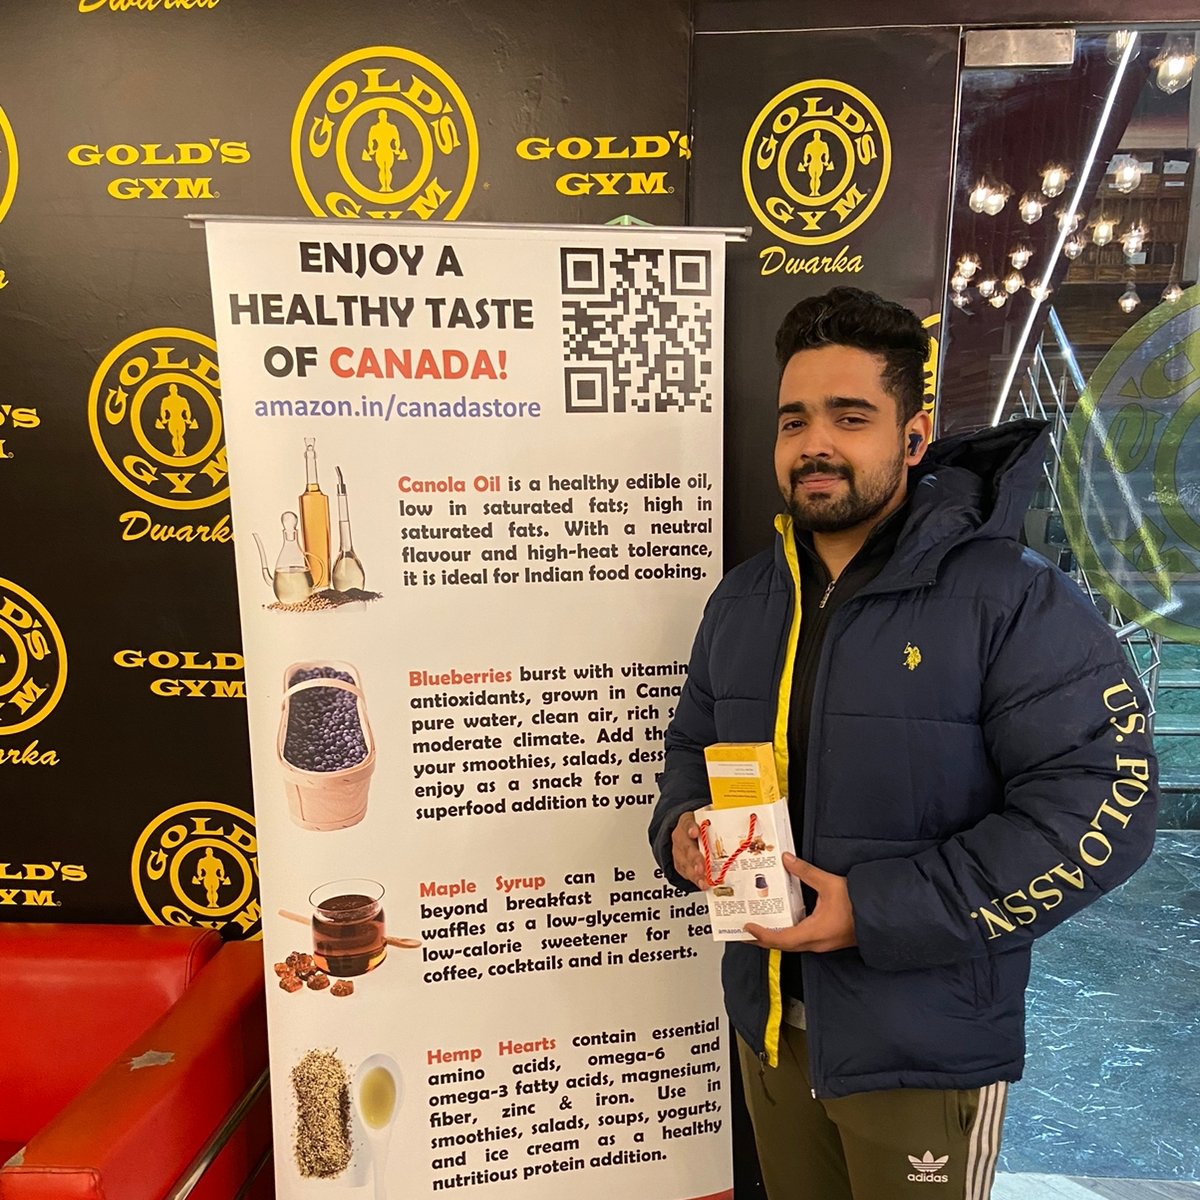 Strengthen your new year resolution #healthyeating using nutritious and wholesome 🇨🇦 food ingredients like #CanolaOil #Blueberries #HempFood & #MapleSyrup. Don't miss the sampling activity @GoldsGymIndia at Greater Kailash & Dwarka on Jan 18-19!! Stay tuned for more cities!!!